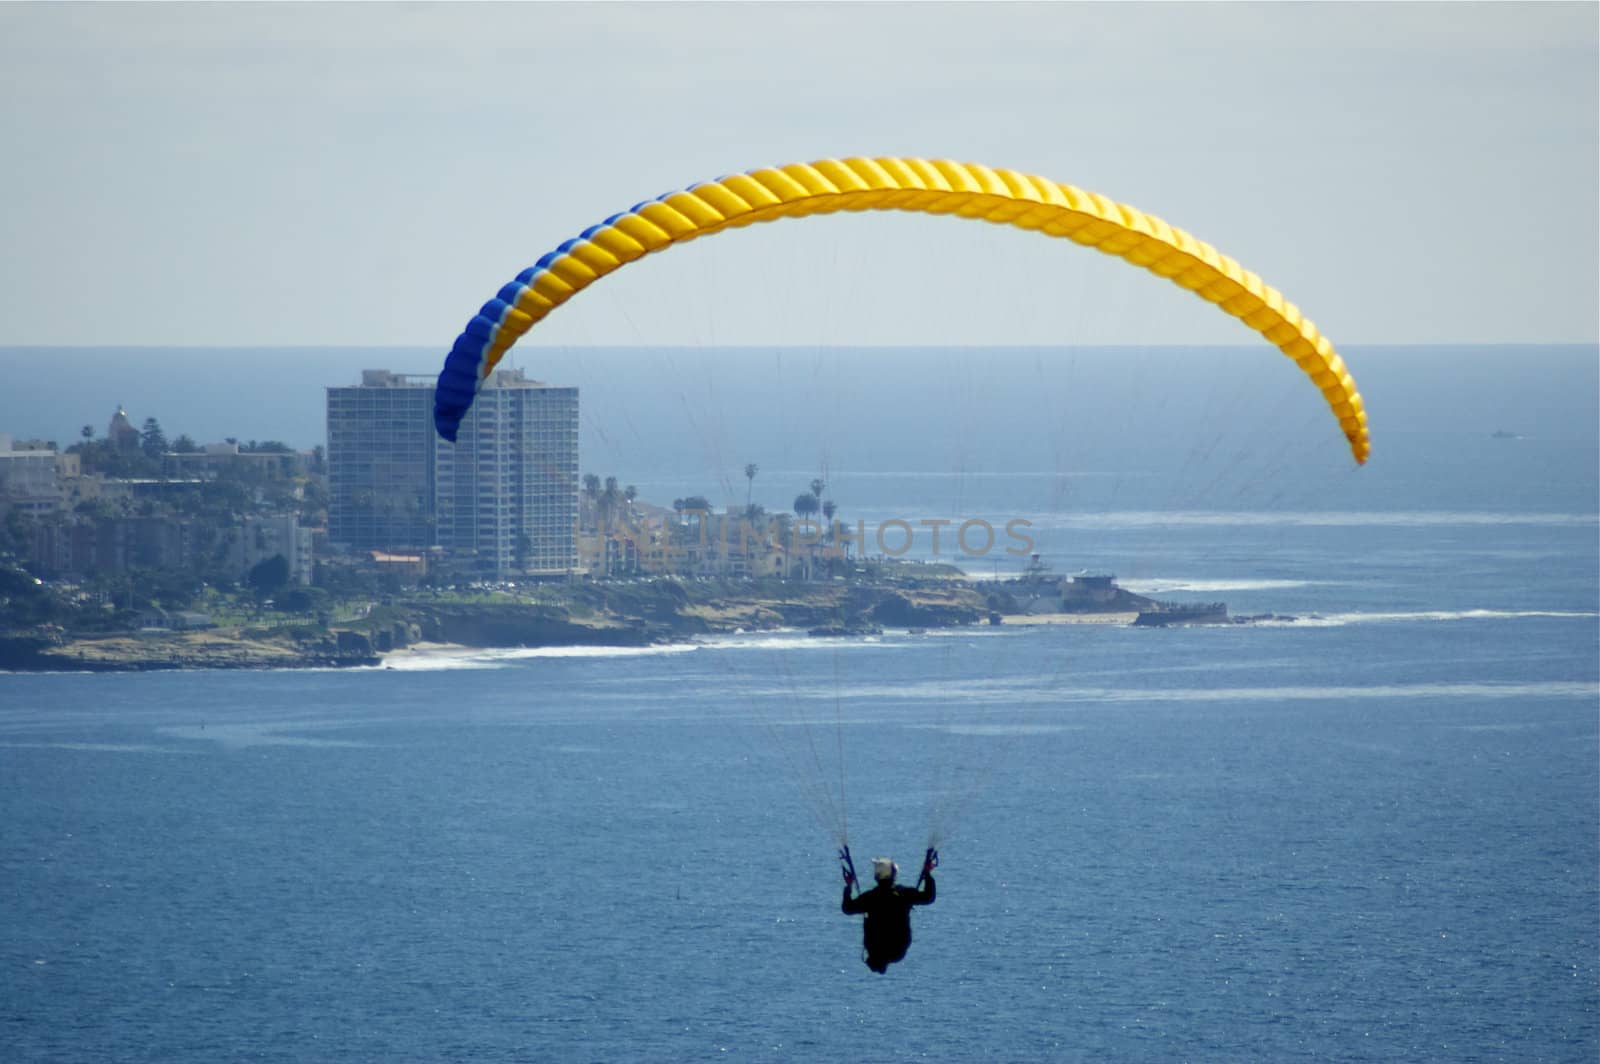 Hang-glider front and centre over ocean with metropolitan bay in background, against blue sky with copy space.